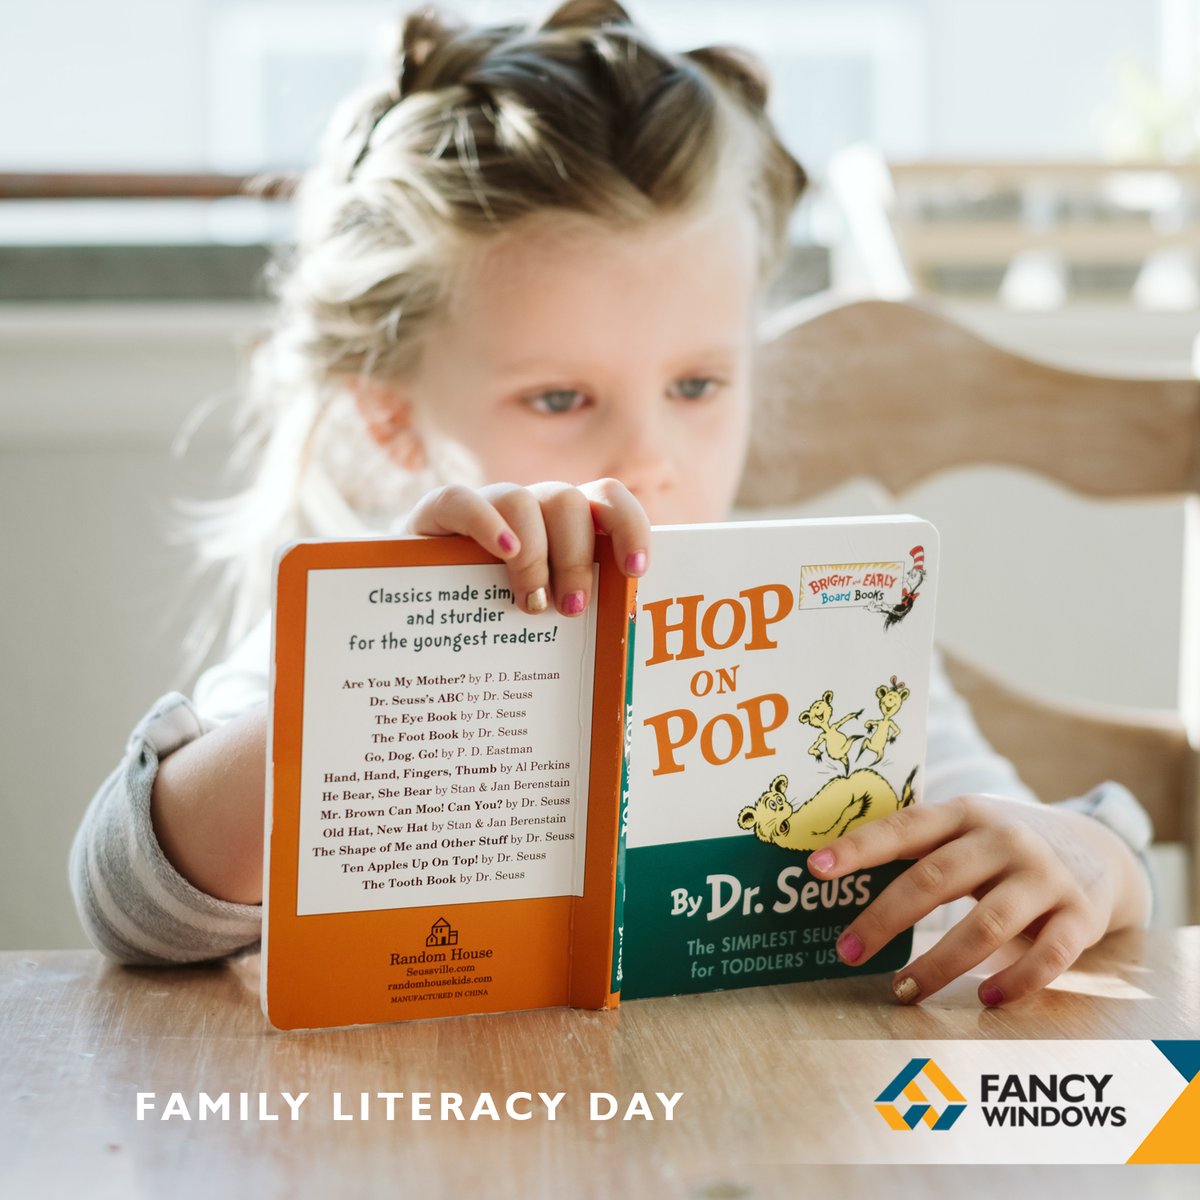 Celebrate Family Literacy Day by either reading a book or visiting your local library.
#literacyday #FancyDoors #FancyDoorsandMouldings #FancyWindows